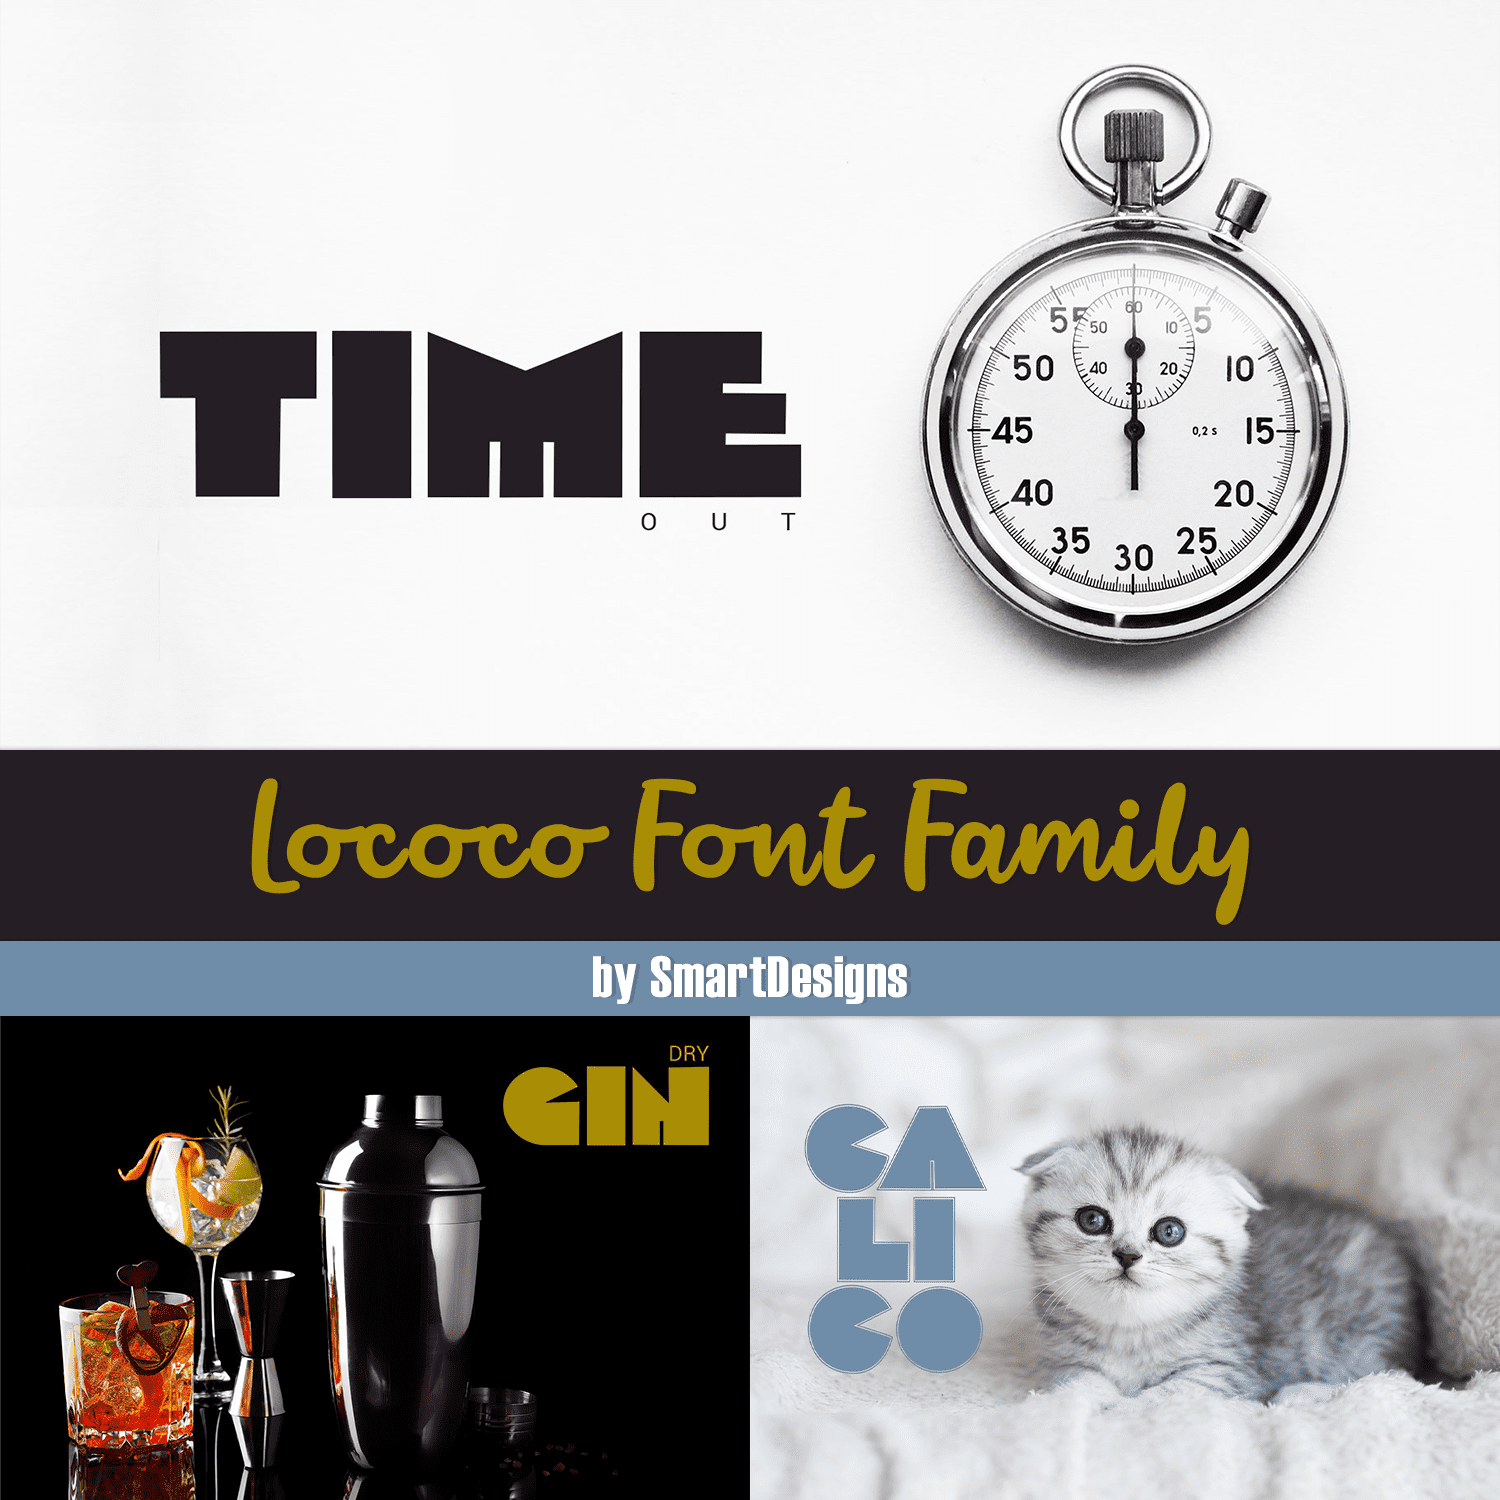 Prints of lococo font family.